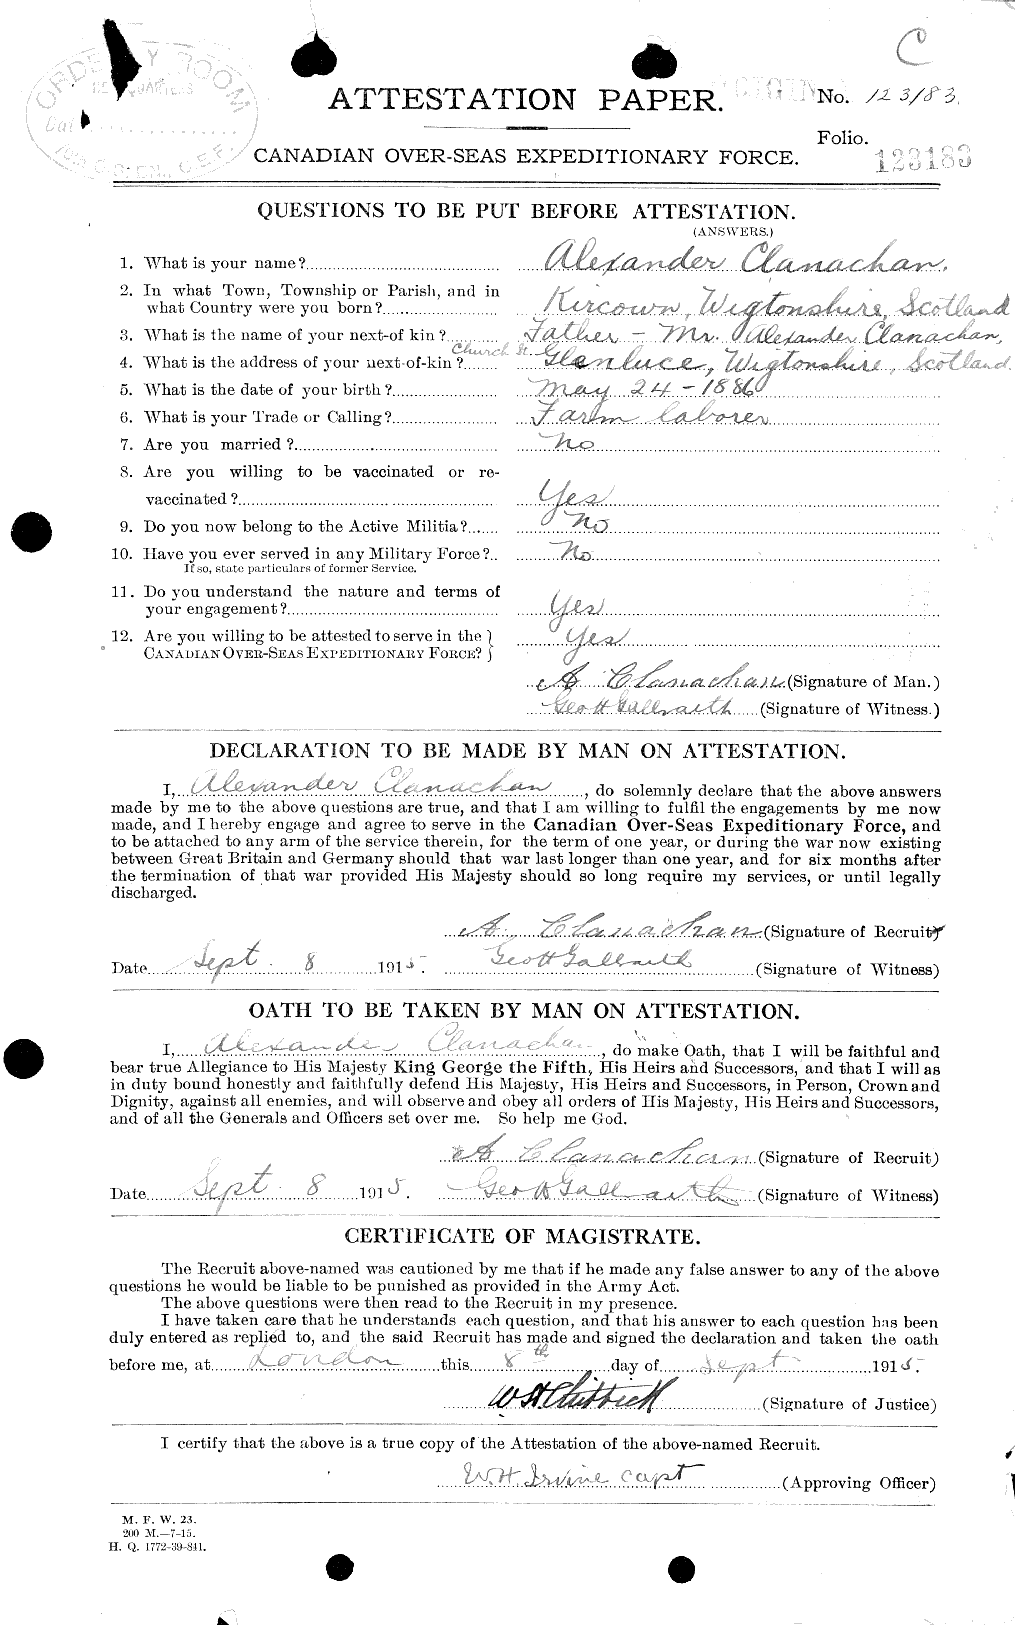 Personnel Records of the First World War - CEF 020524a